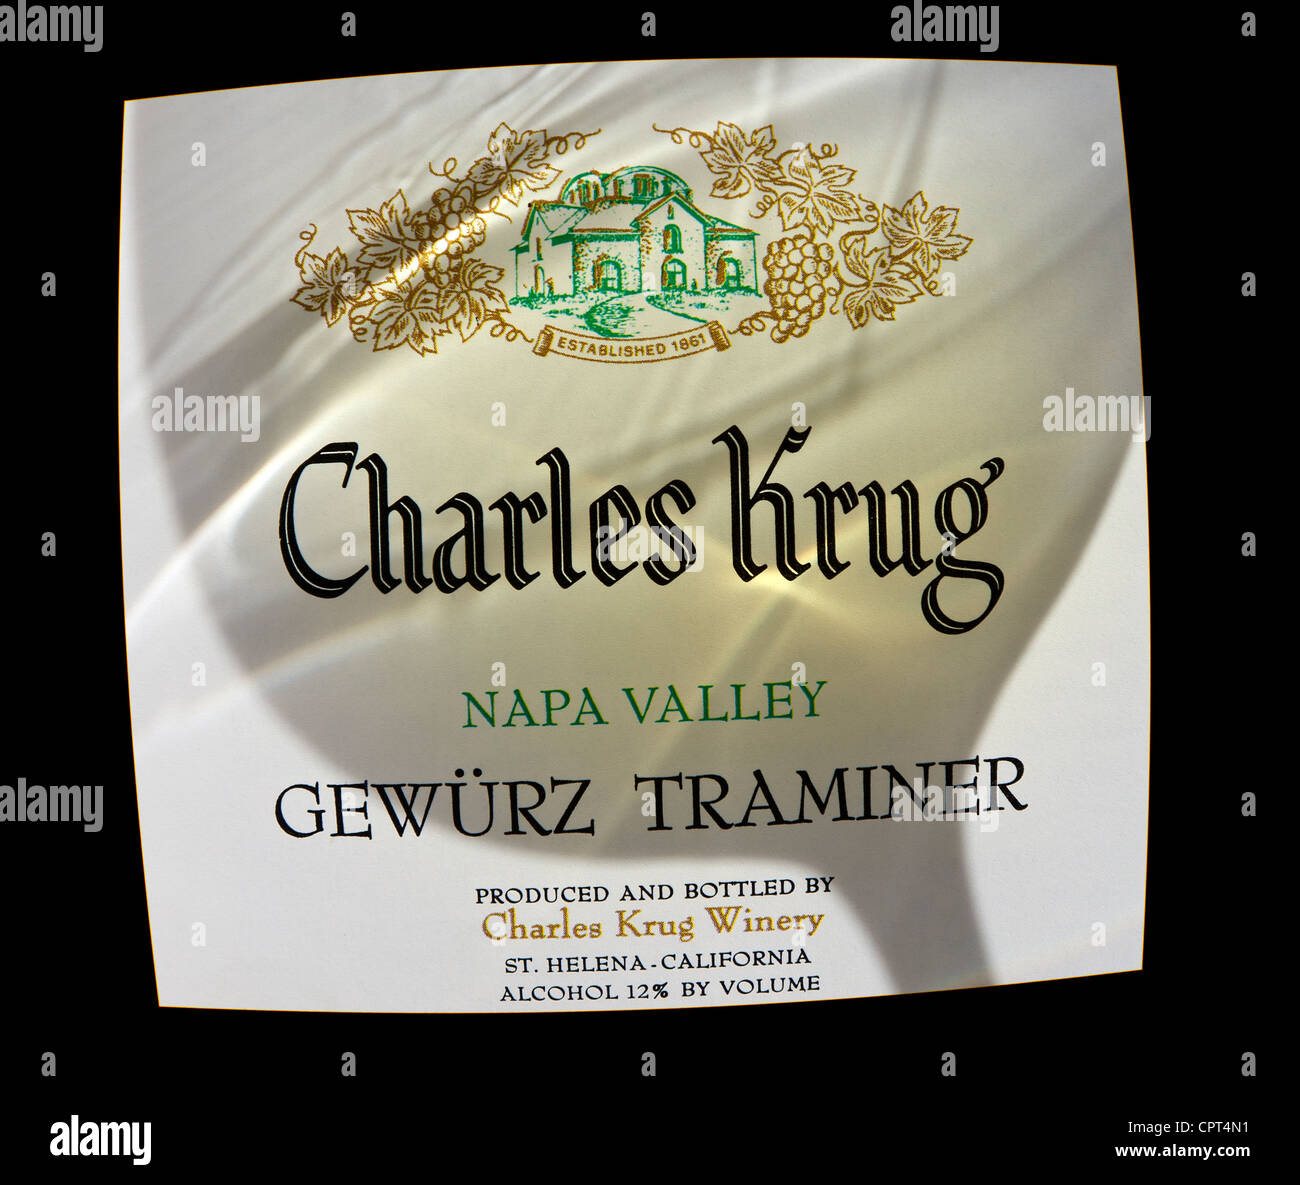 Charles Krug Gewürz Traminer bottle label Napa Valley, with shadow of wine swirling in tasting glass Stock Photo